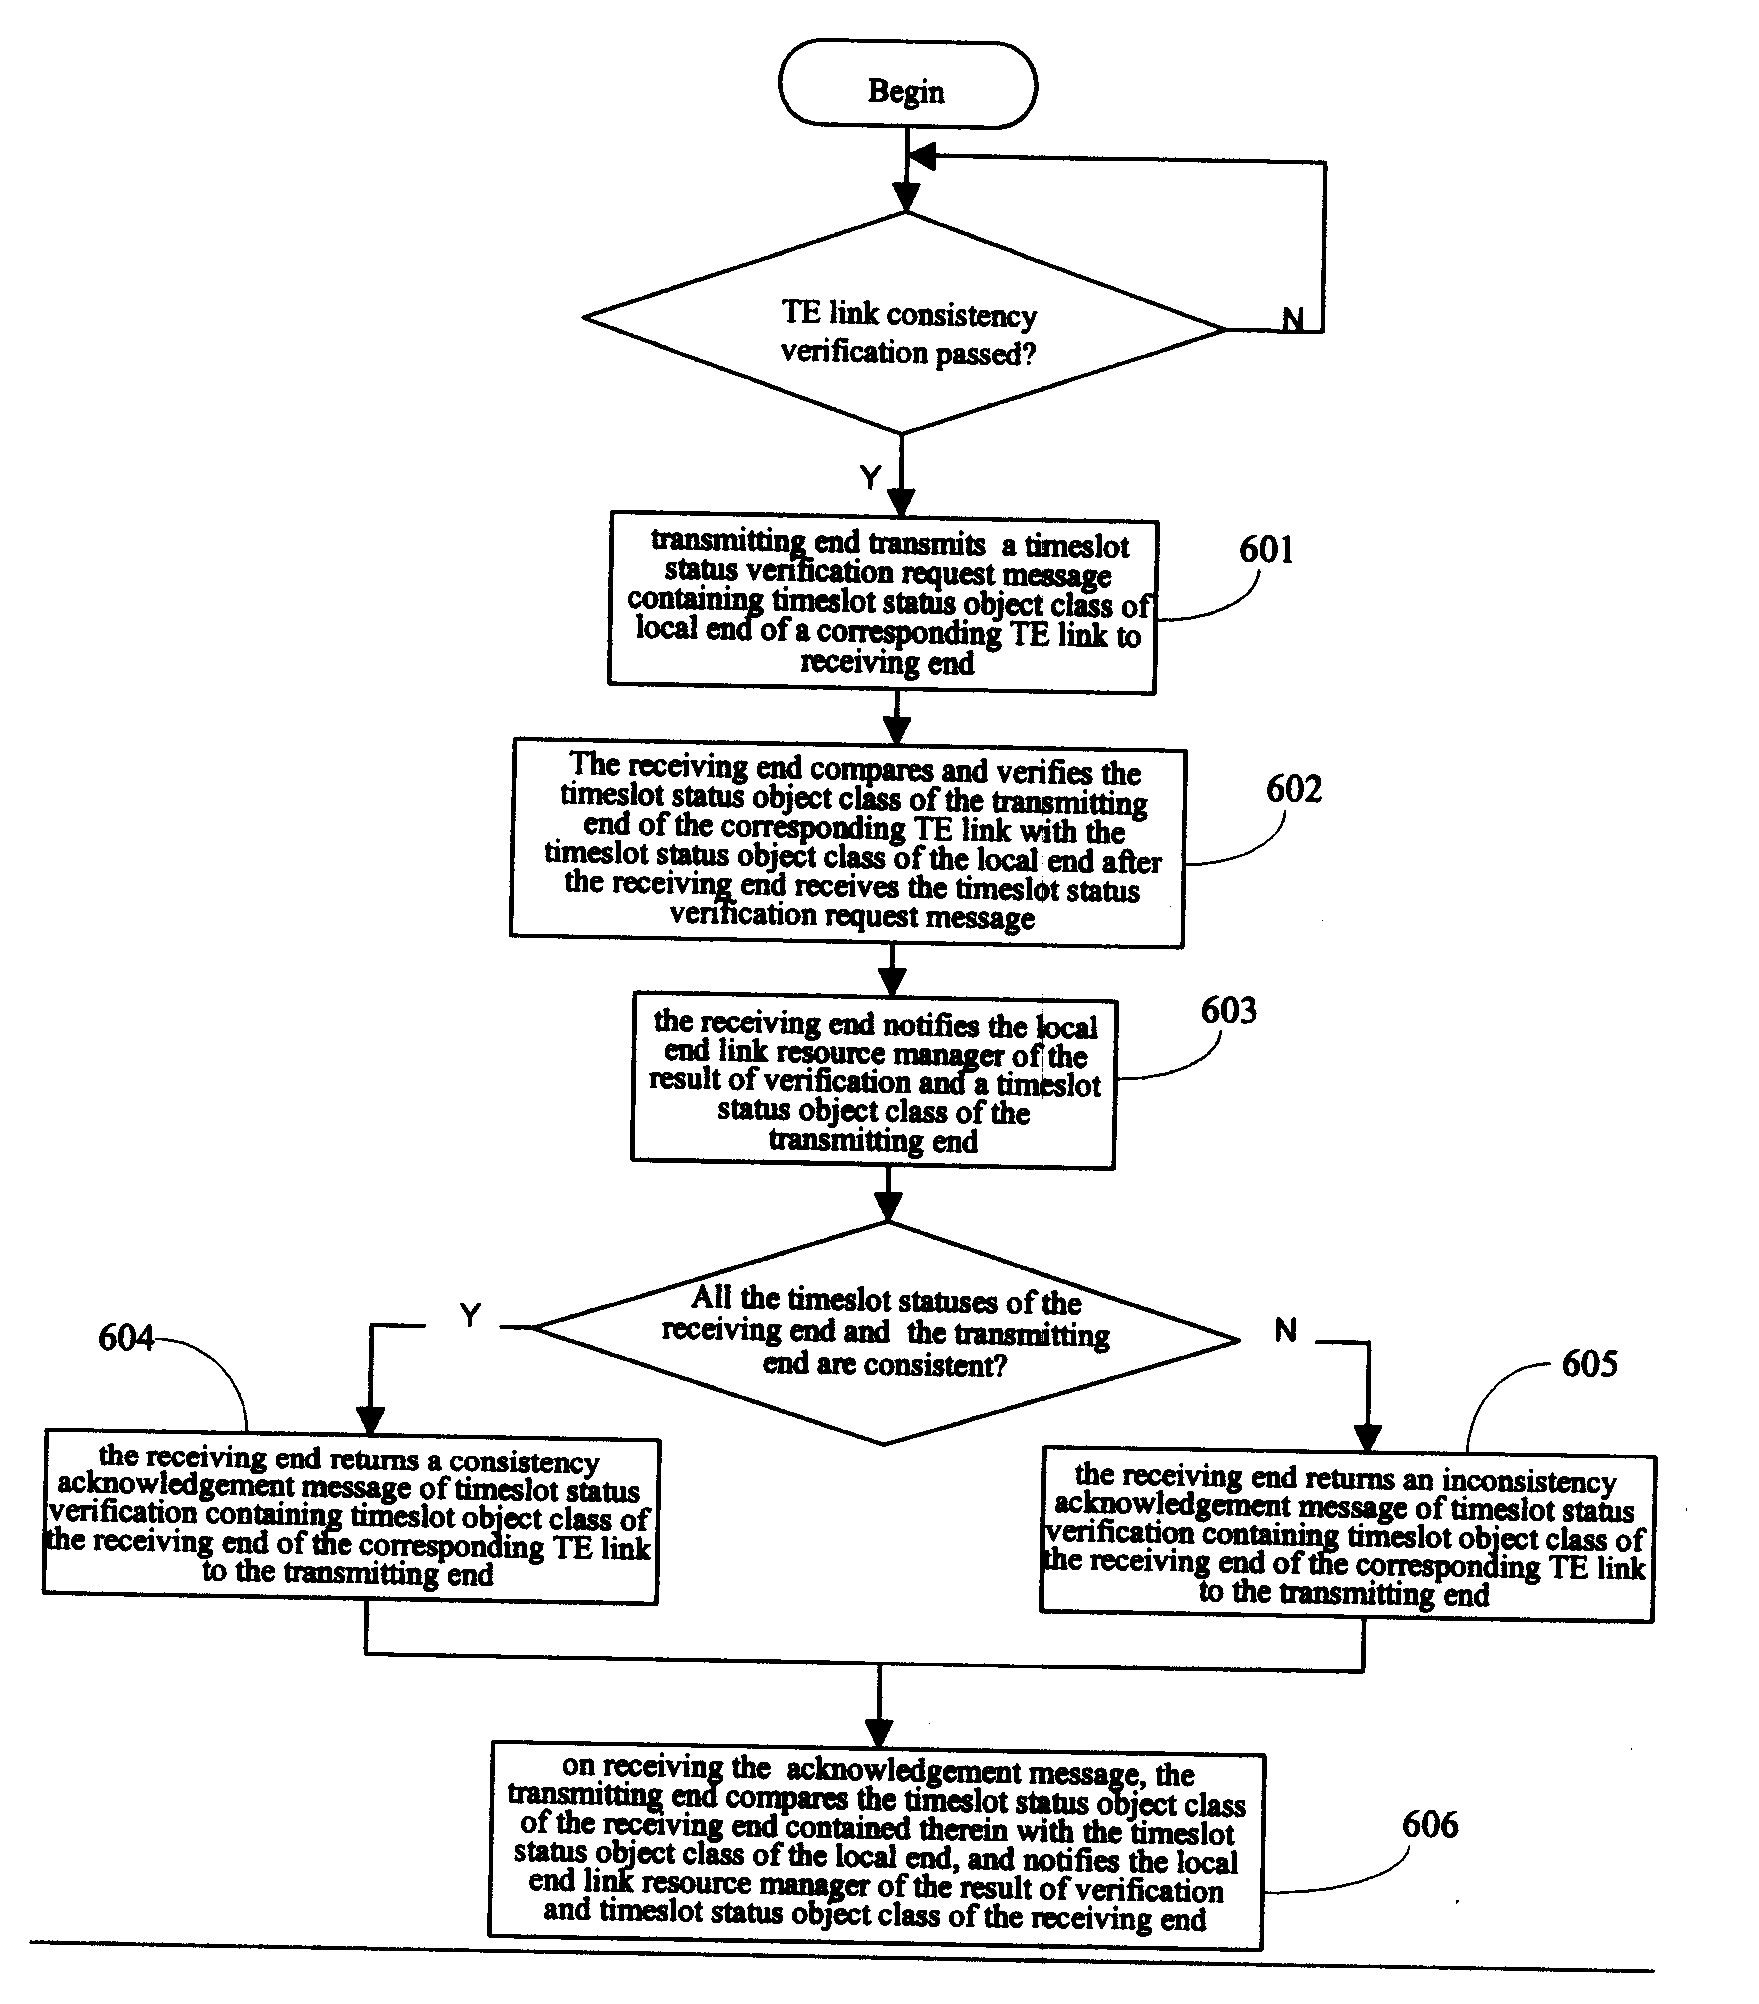 Method and an Apparatus for Consistency Verification of Traffic Engineering Link Timeslot Status